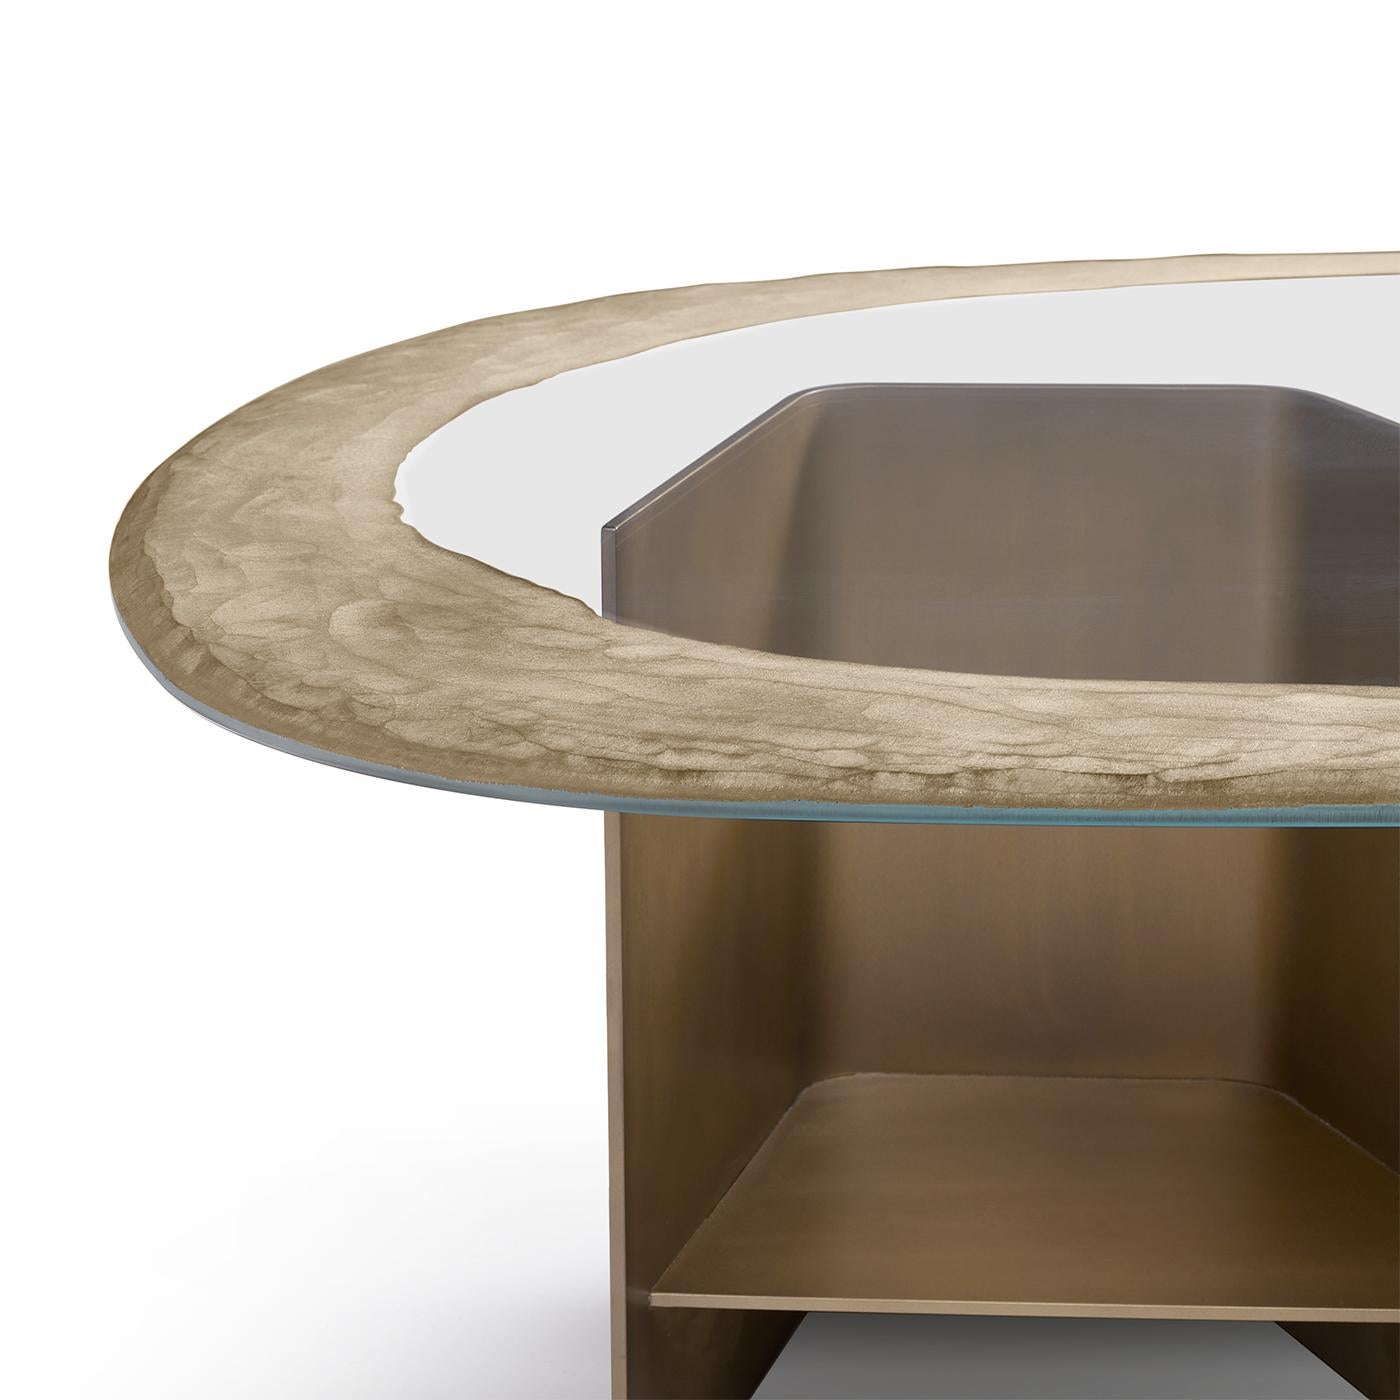 This coffee table epitomizes elegance, featuring a burnished brass metal structure and a top crafted from 15mm extra-clear glass. The meticulous detailing includes an engraved edge, treated with a diamond and silver grinding wheel, adding a touch of